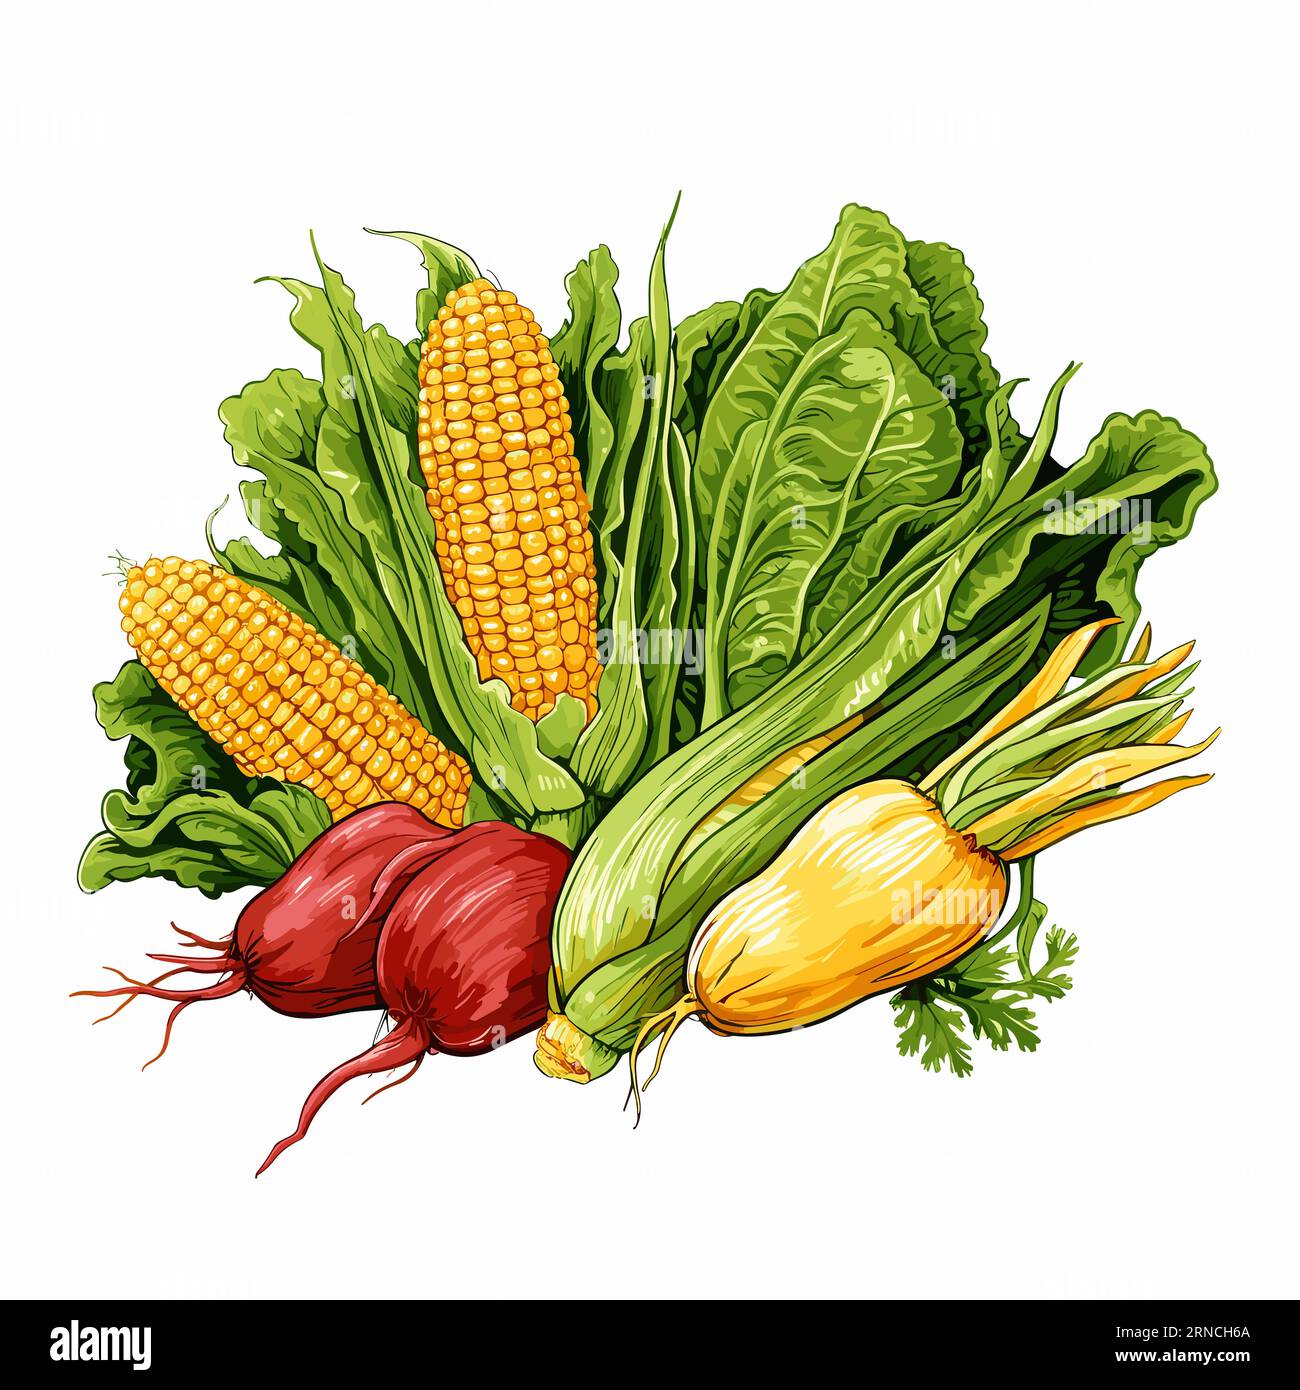 Healthy Meal Stock Image Of Corn, Beets, And Broccoli, In The Style Of Realistic Portrait Painter, Graphic Illustration, Detailed Botanical Illustrati Stock Vector